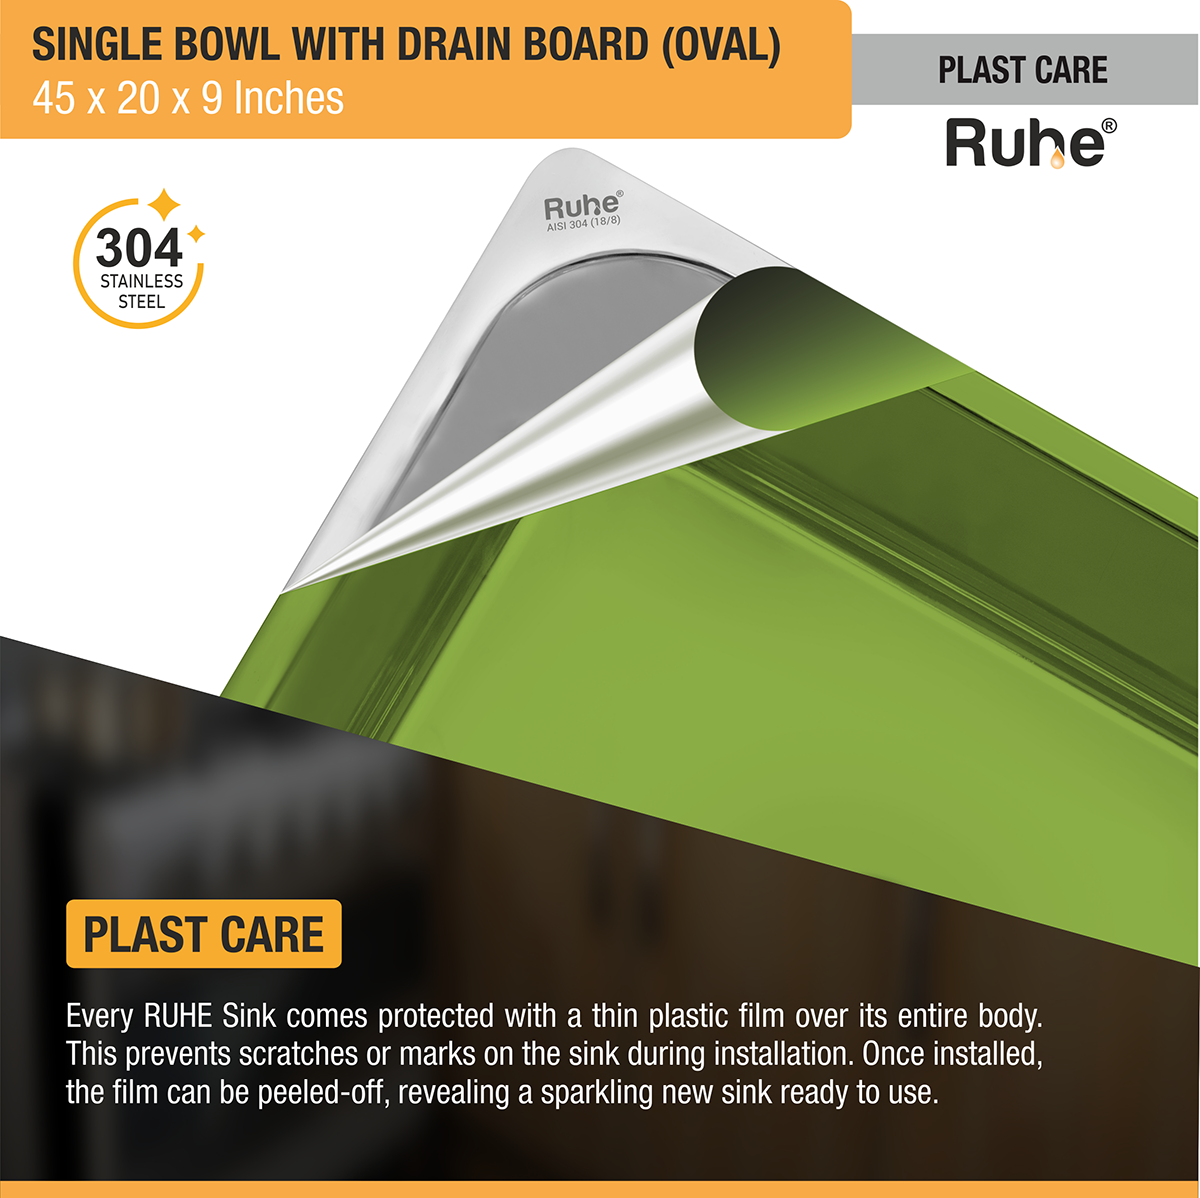 Oval Single Bowl (45 x 20 x 9 inches) 304-Grade Stainless Steel Kitchen Sink with Drainboard plast care